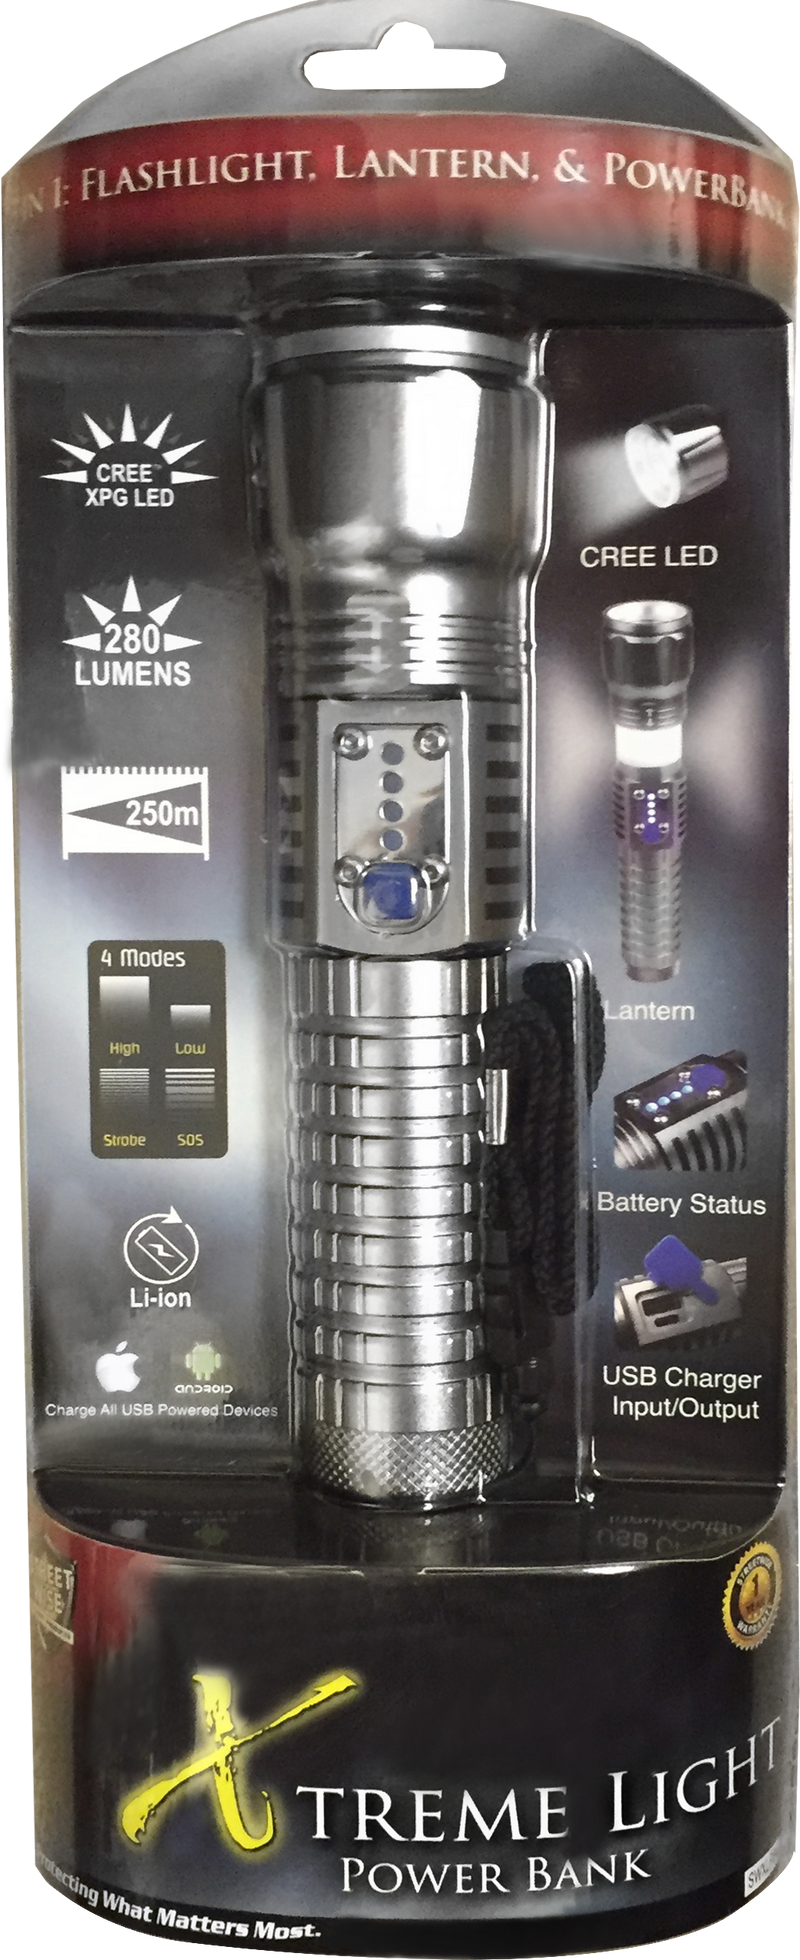 Streetwise flashlight with power bank. Shown with packaging.